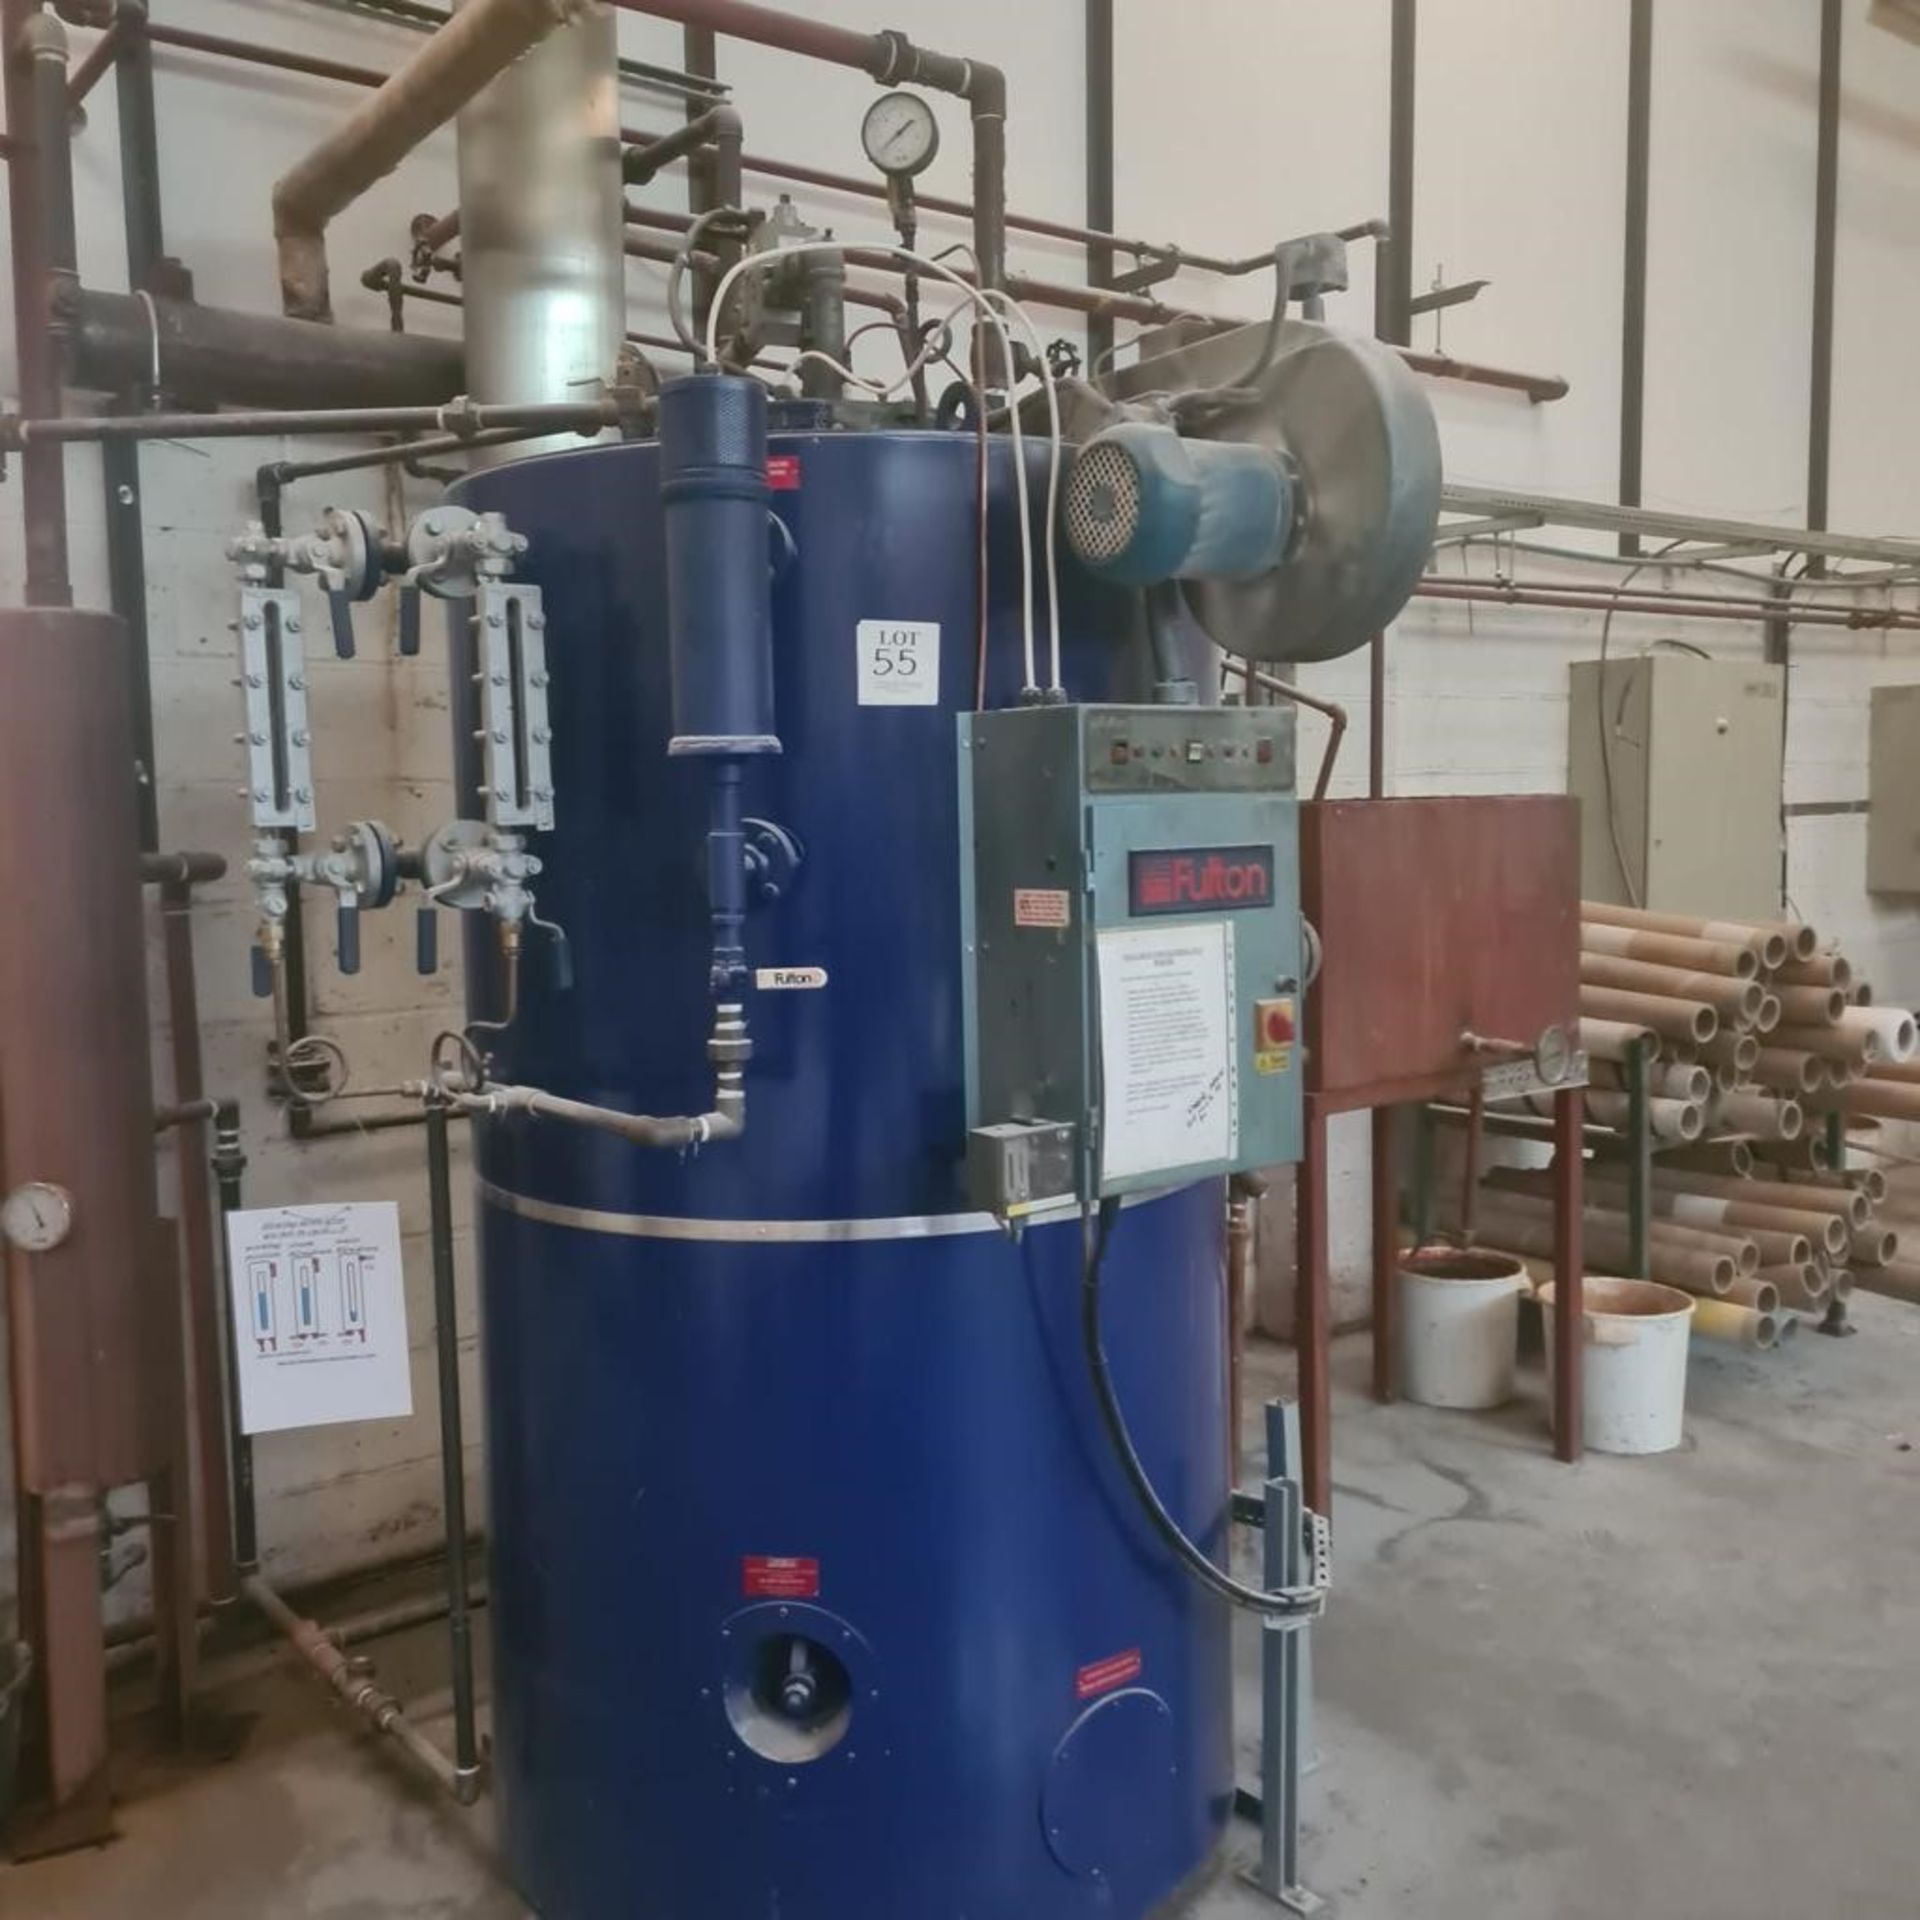 Fulton fuel-fired steam boiler, model 30J, Serial No. B9883, Year of Manufacture 2017 (METHOD